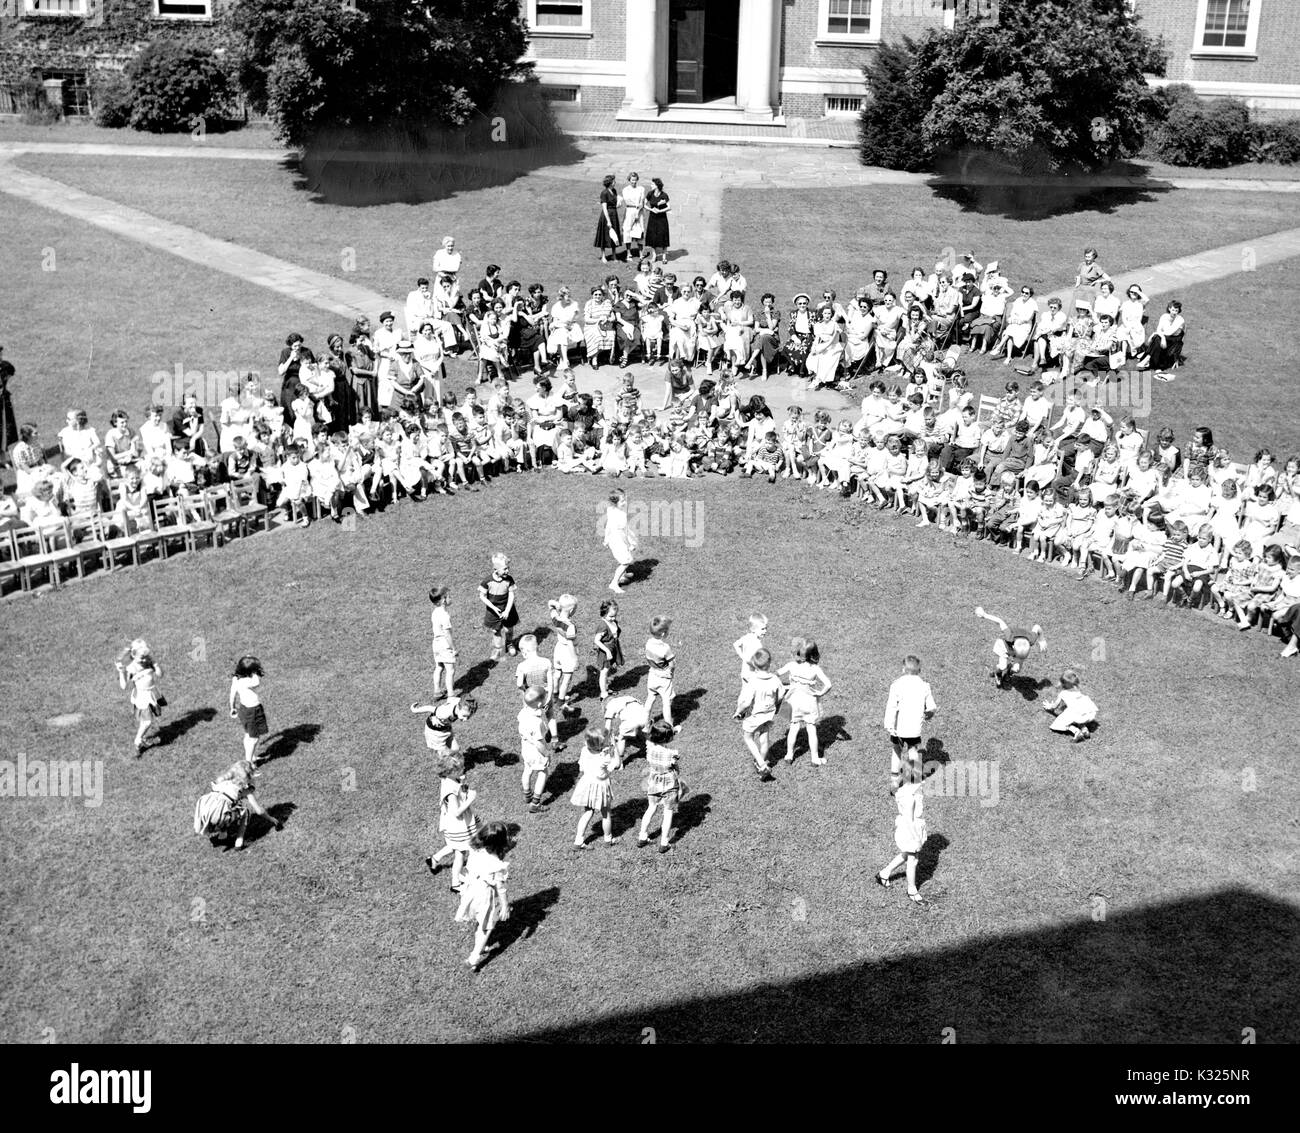 At the end of the school year for a demonstration school at Johns Hopkins University, young boys and girls put on a show in the grass on a sunny day, happily skipping and dancing in front of an audience made up of classmates, teachers, and parents sitting and standing outside of an ivy-covered campus building on an open quadrangle, Baltimore, Maryland, July, 1950. Stock Photo